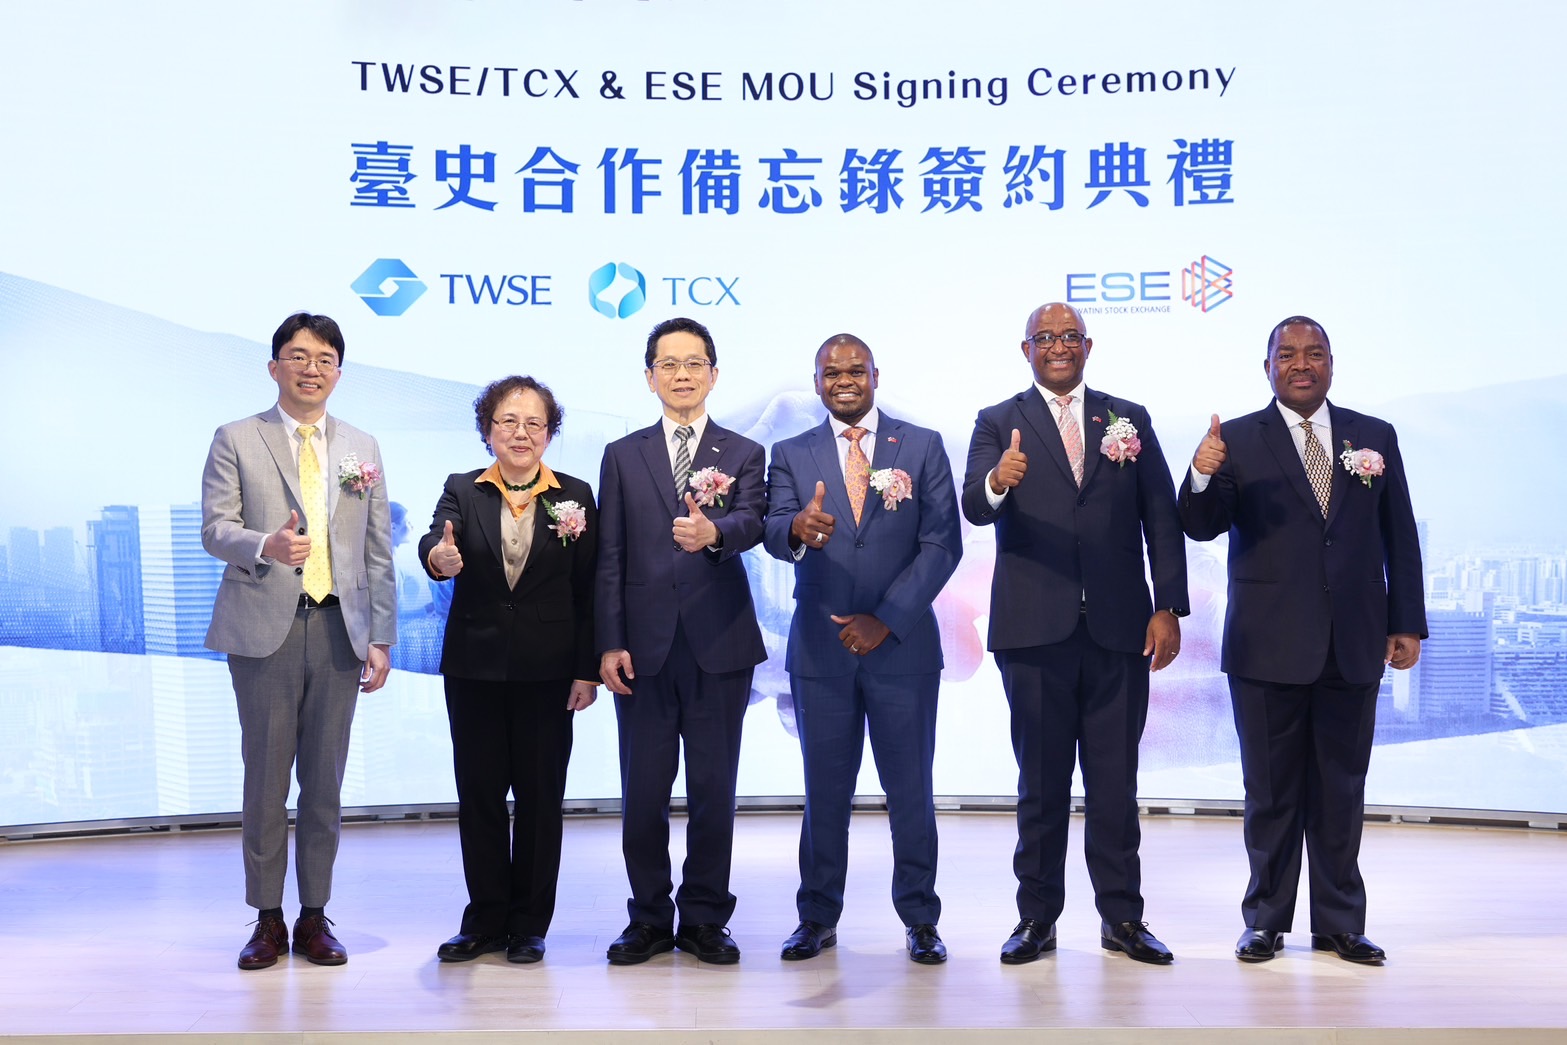 A New Milestone in Taiwan-Eswatini Cooperation: The TWSE and TCX sign MoUs with the ESE